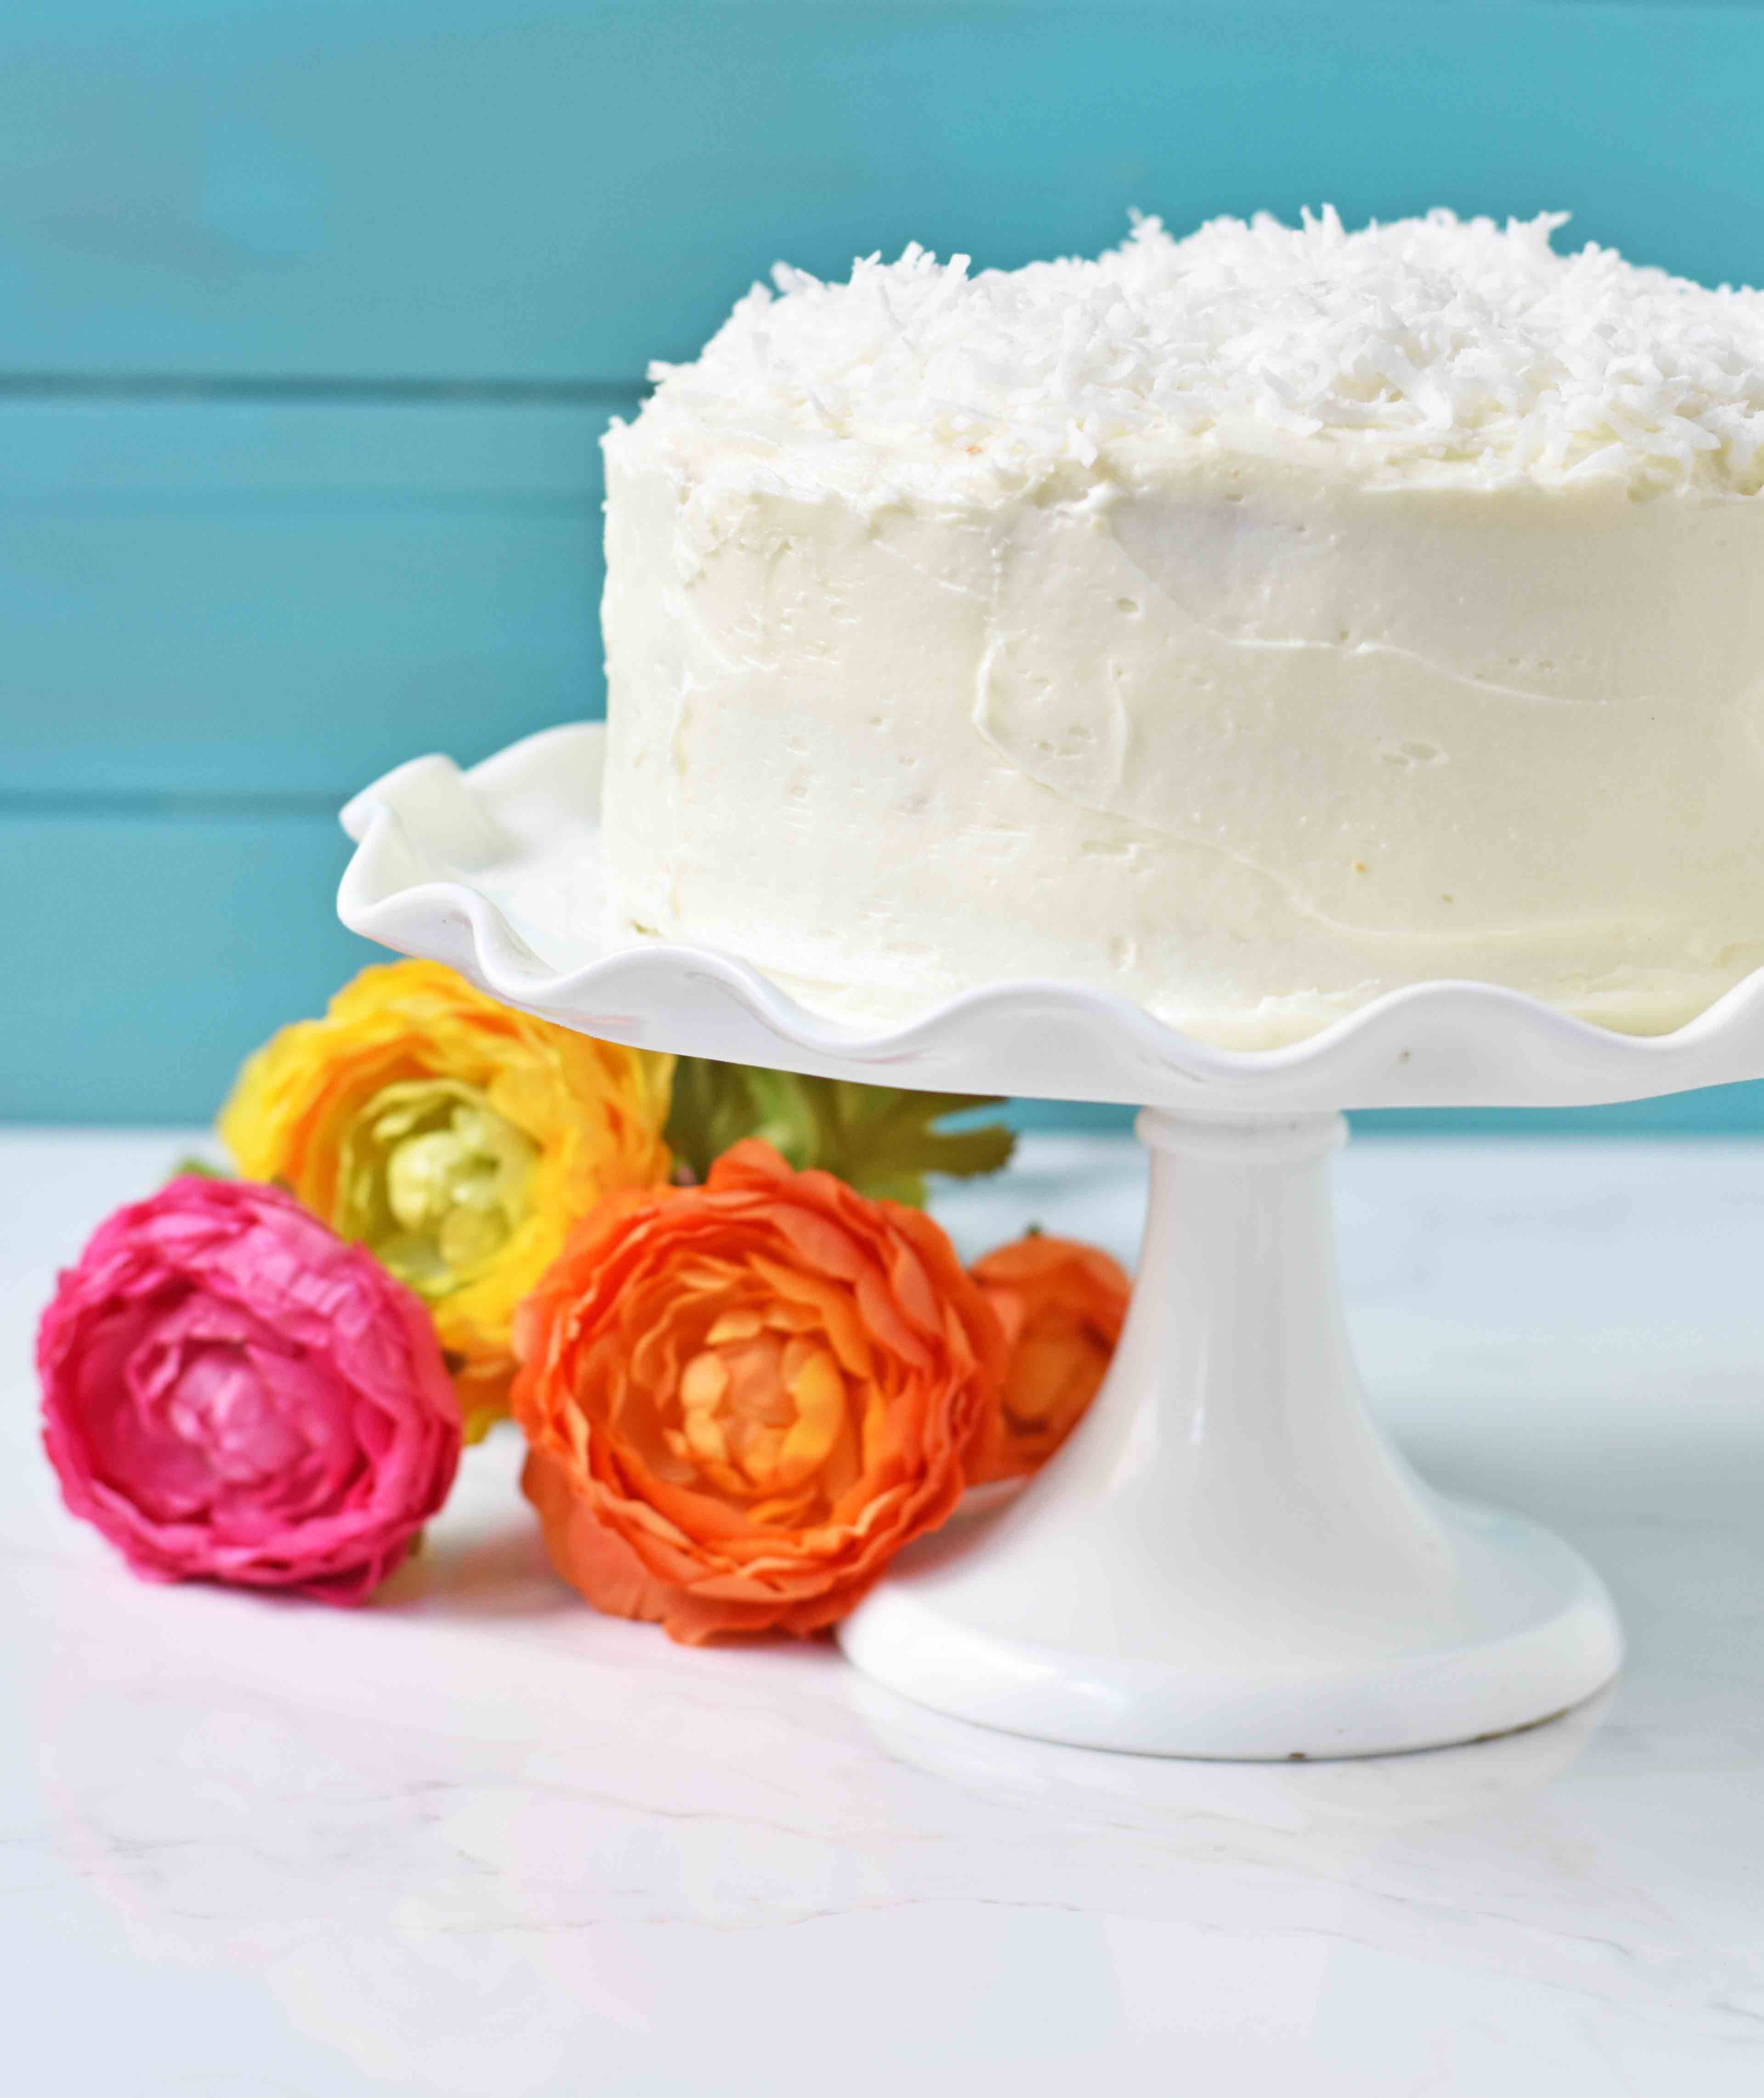 The Best Coconut Cake Recipe. Moist coconut cake with sweet cream cheese frosting. The perfect Southern Coconut Cake Recipe. www.modernhoney.com